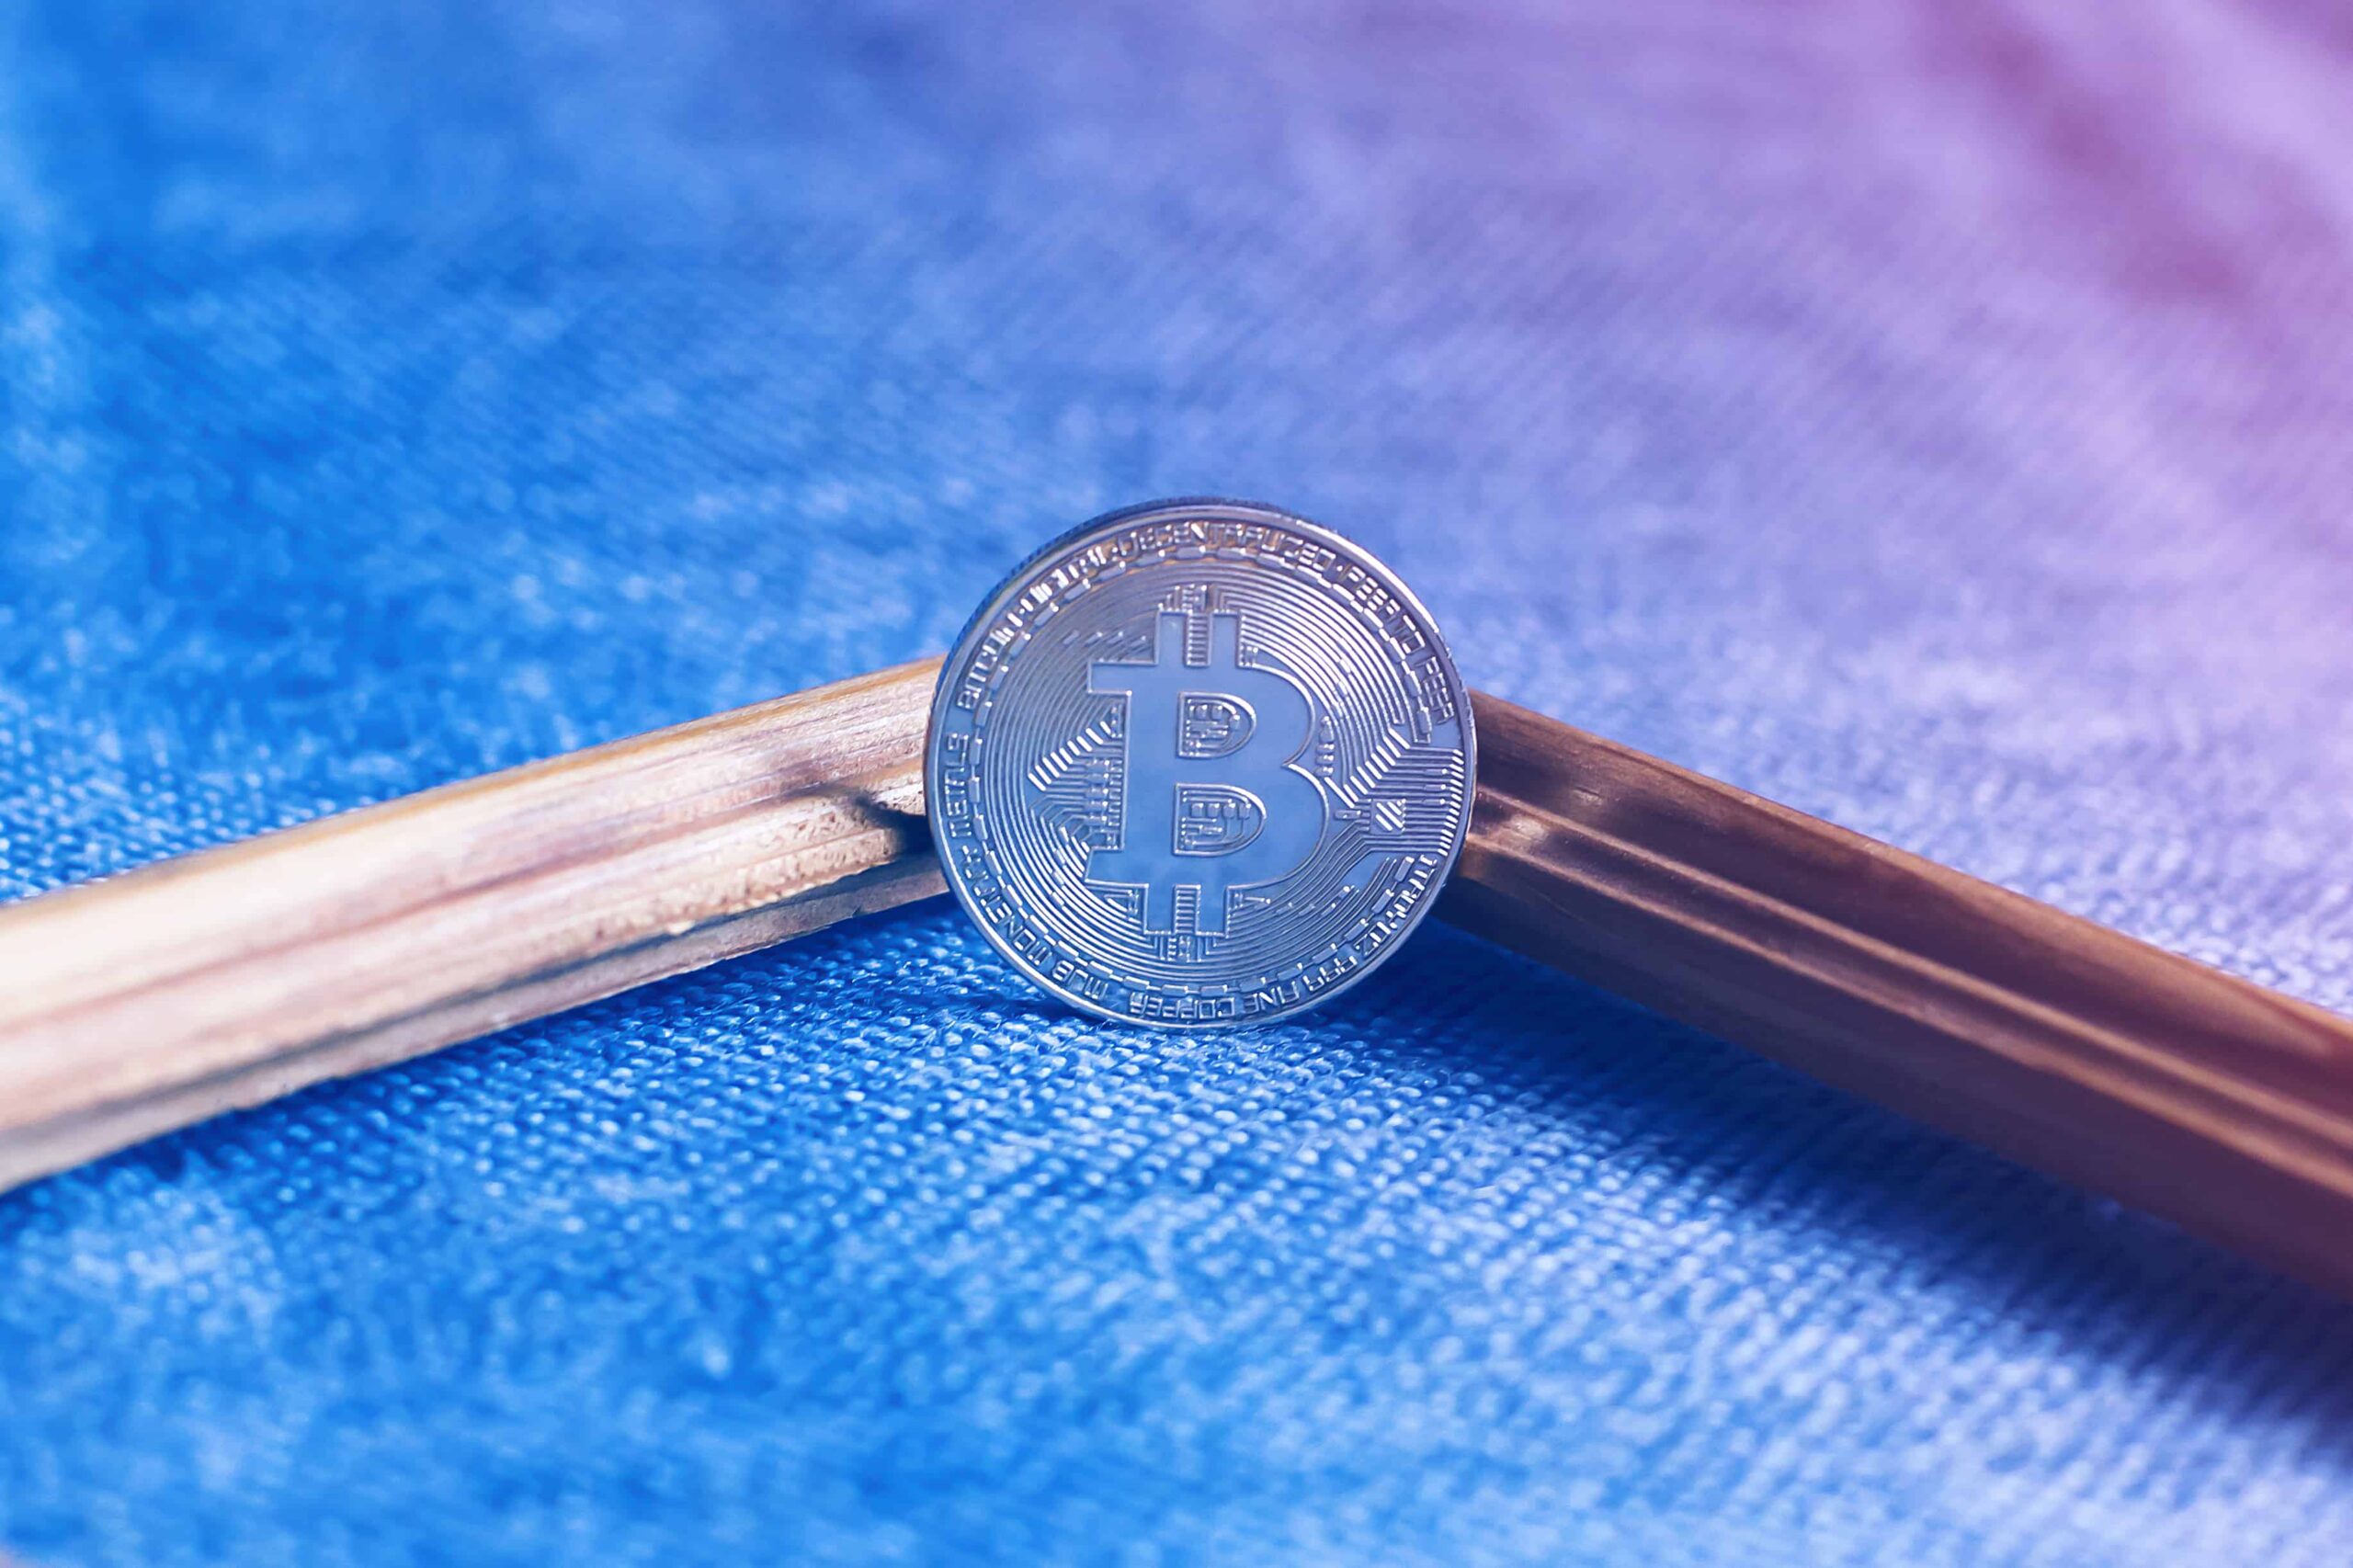 bitcoin in the frame on blue background scaled